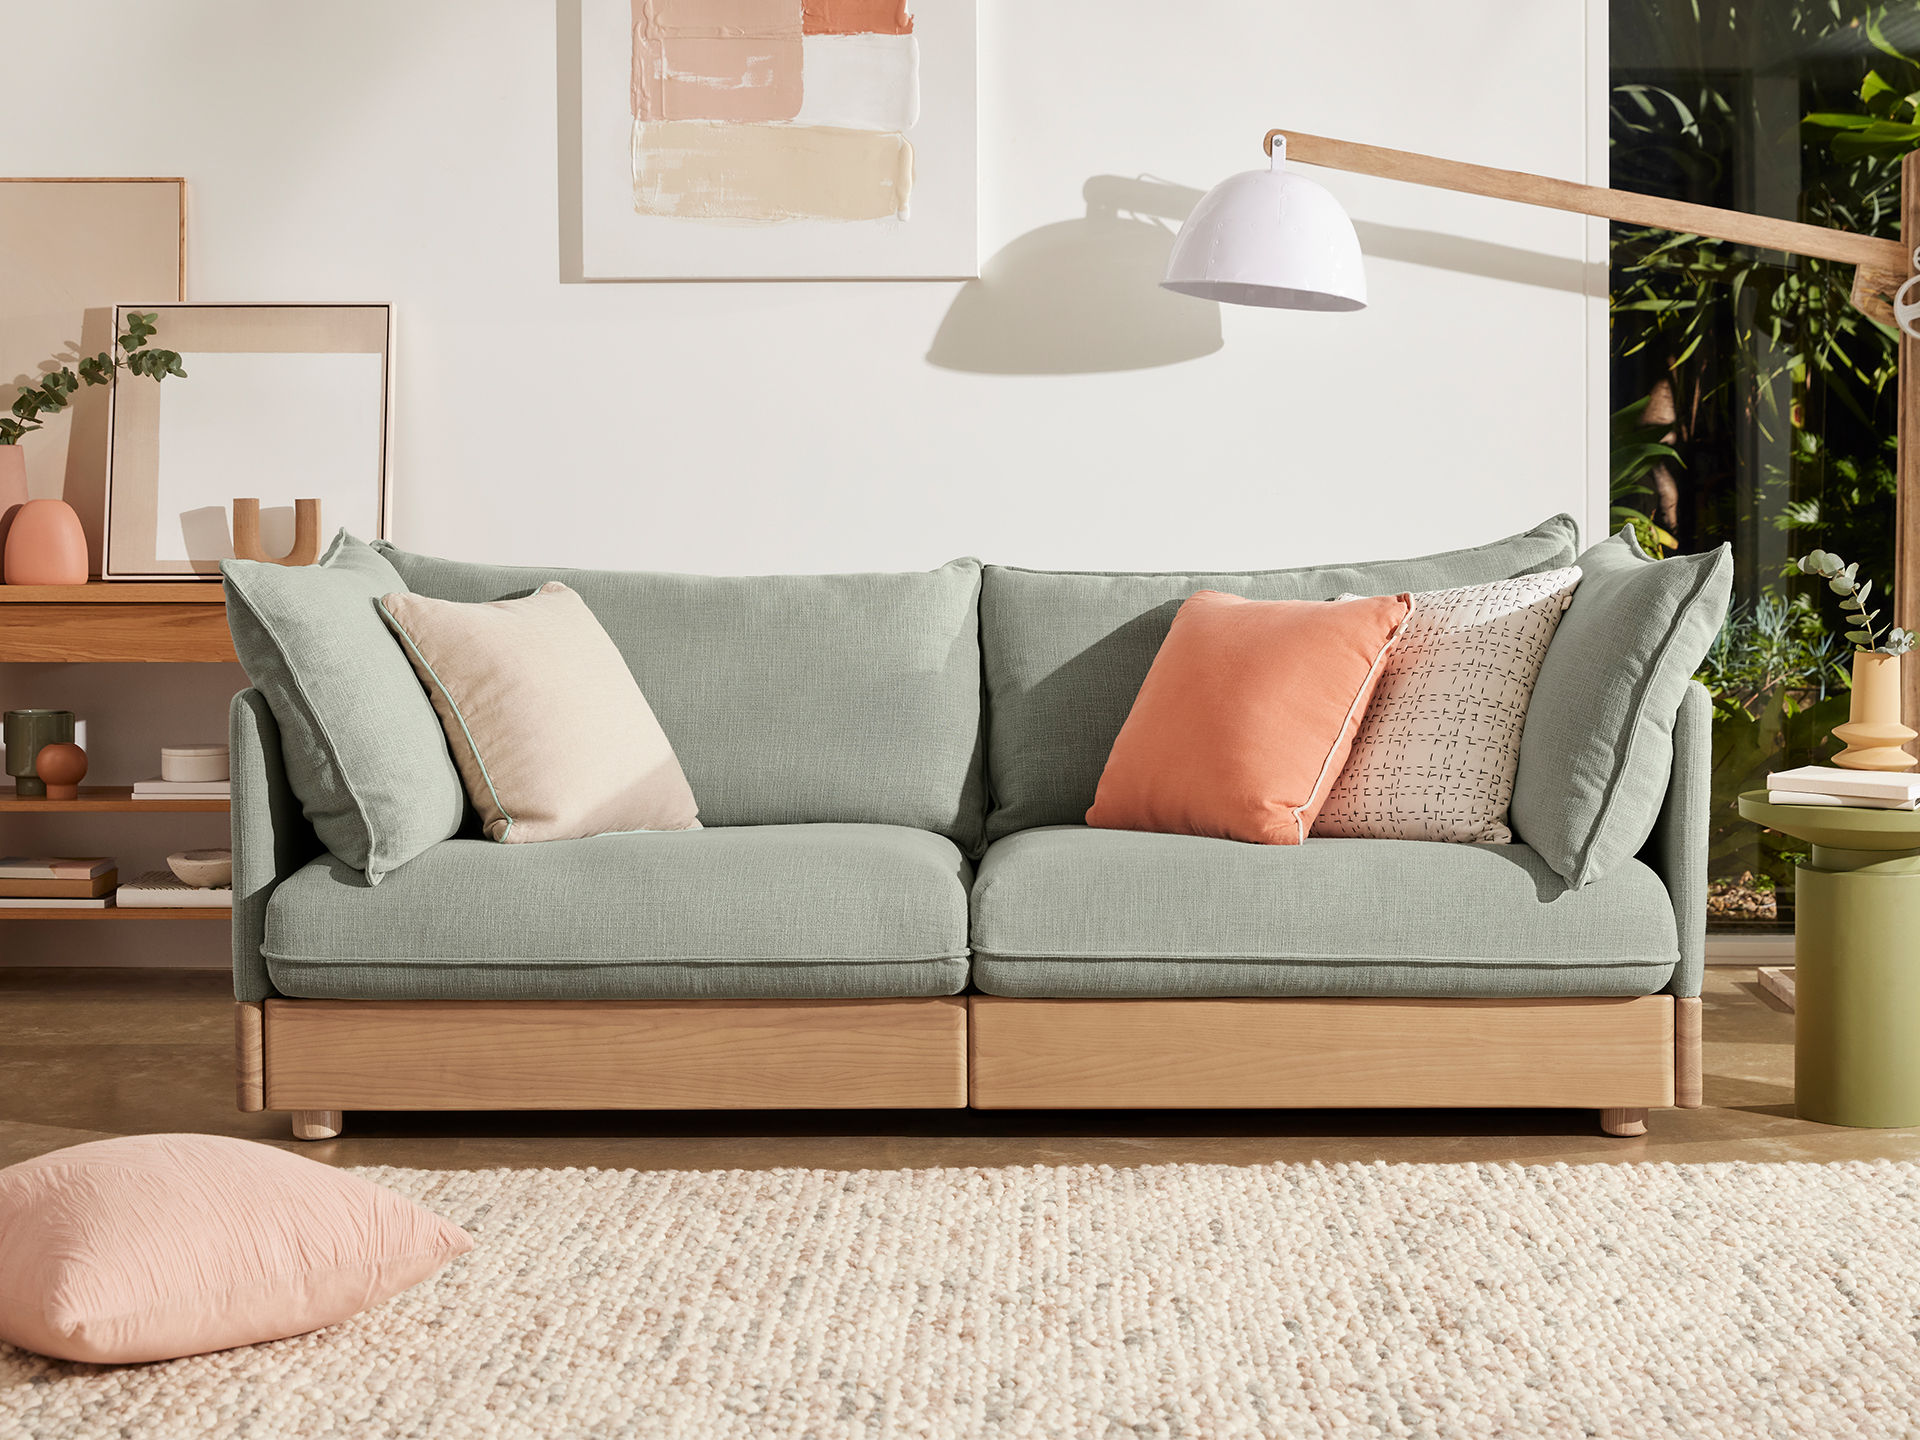 A three seater sofa with light green upholstery and timber base board